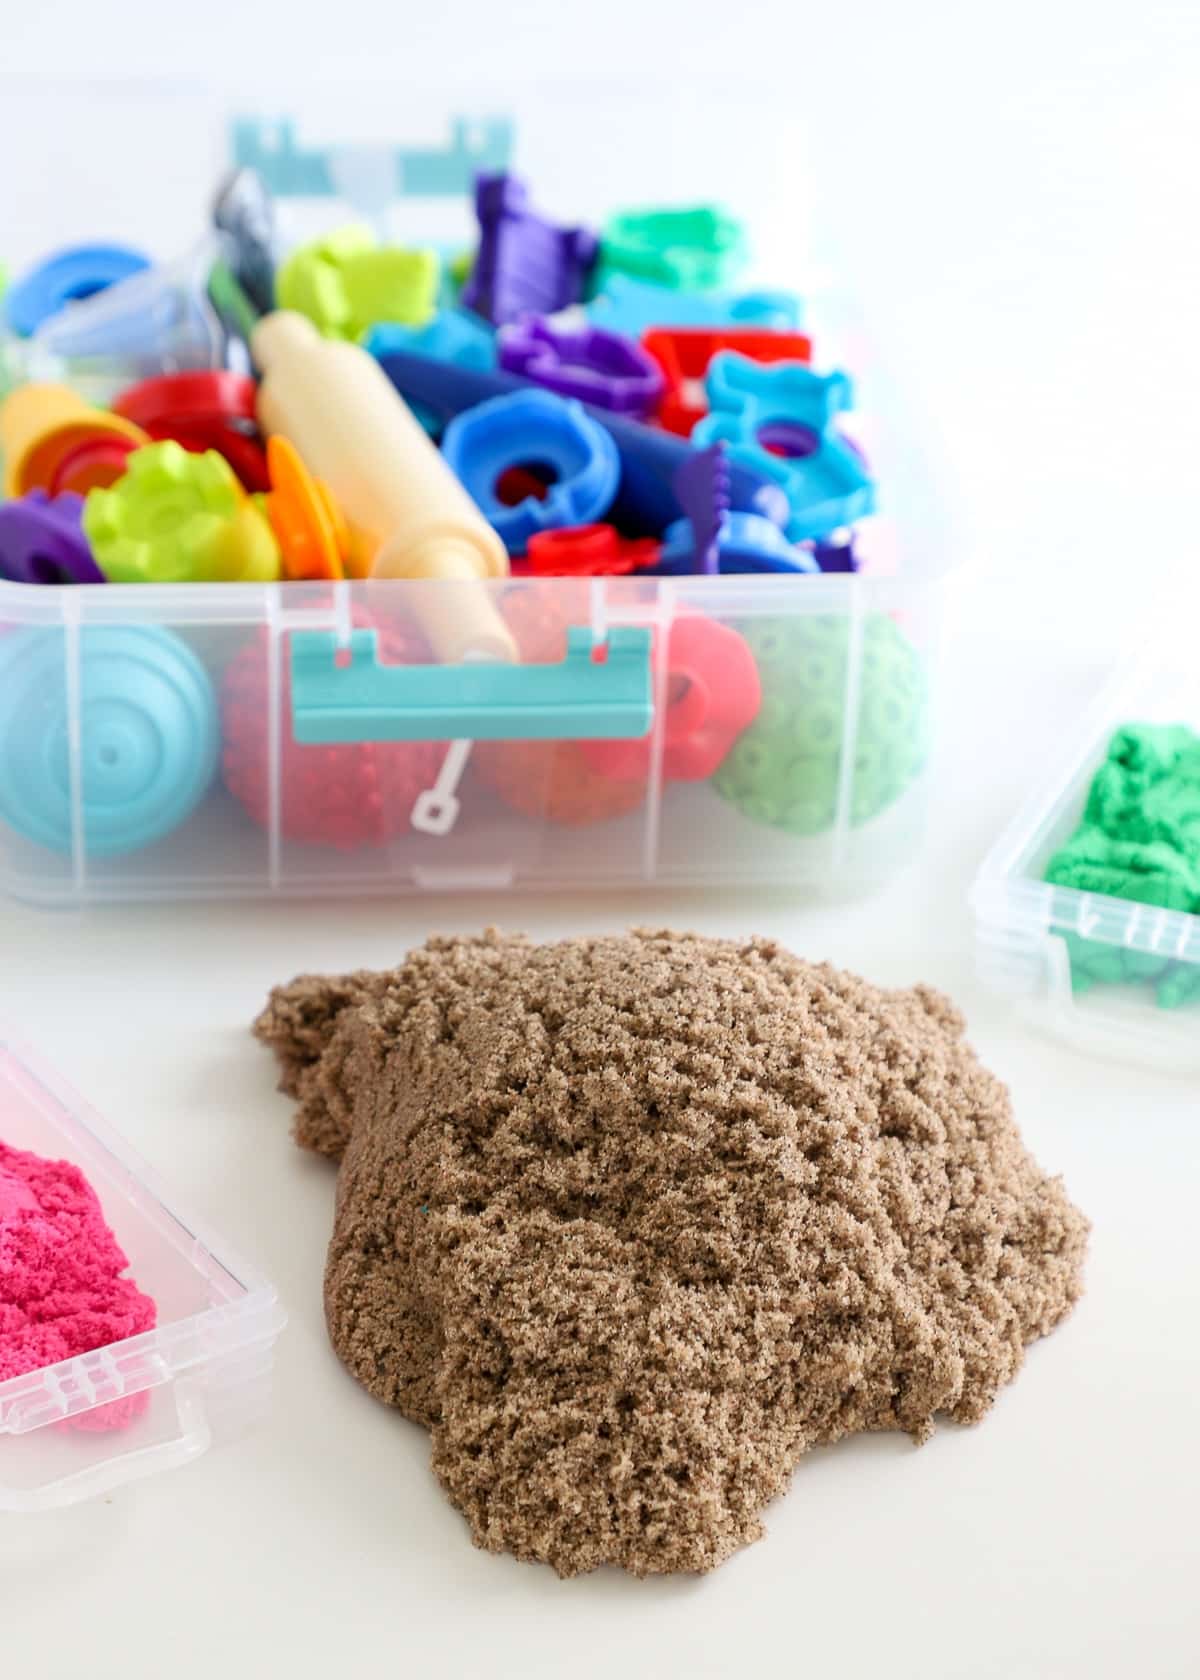 Kinetic Sand Coloured Moulds Set, Toys \ Creative toys